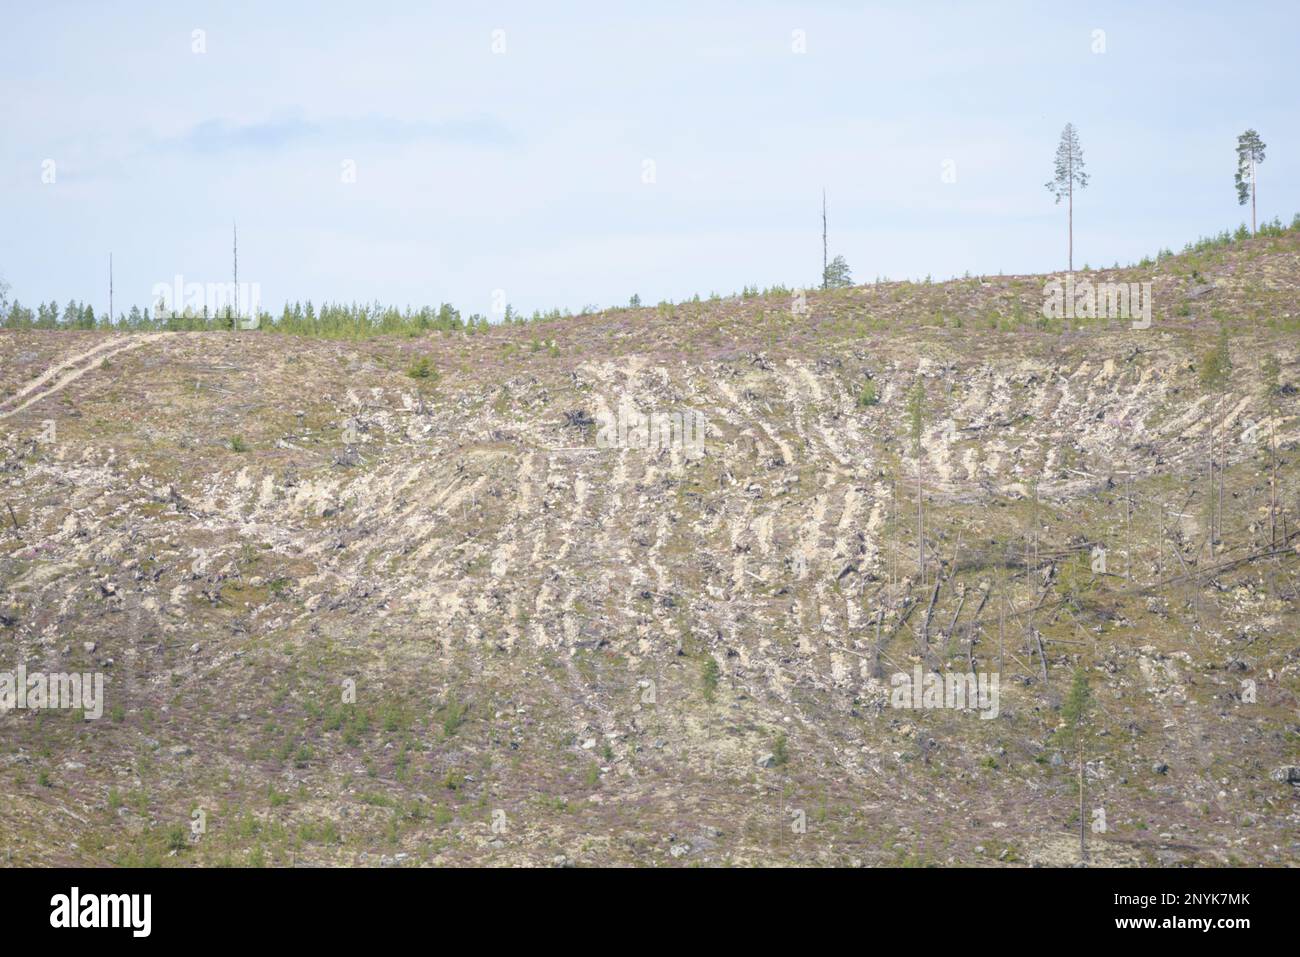 Jämtland / Sweden - Large clear cut in northern Sweden. Scientists and NGOs criticize the massive deforestation and forest destruction. Stock Photo